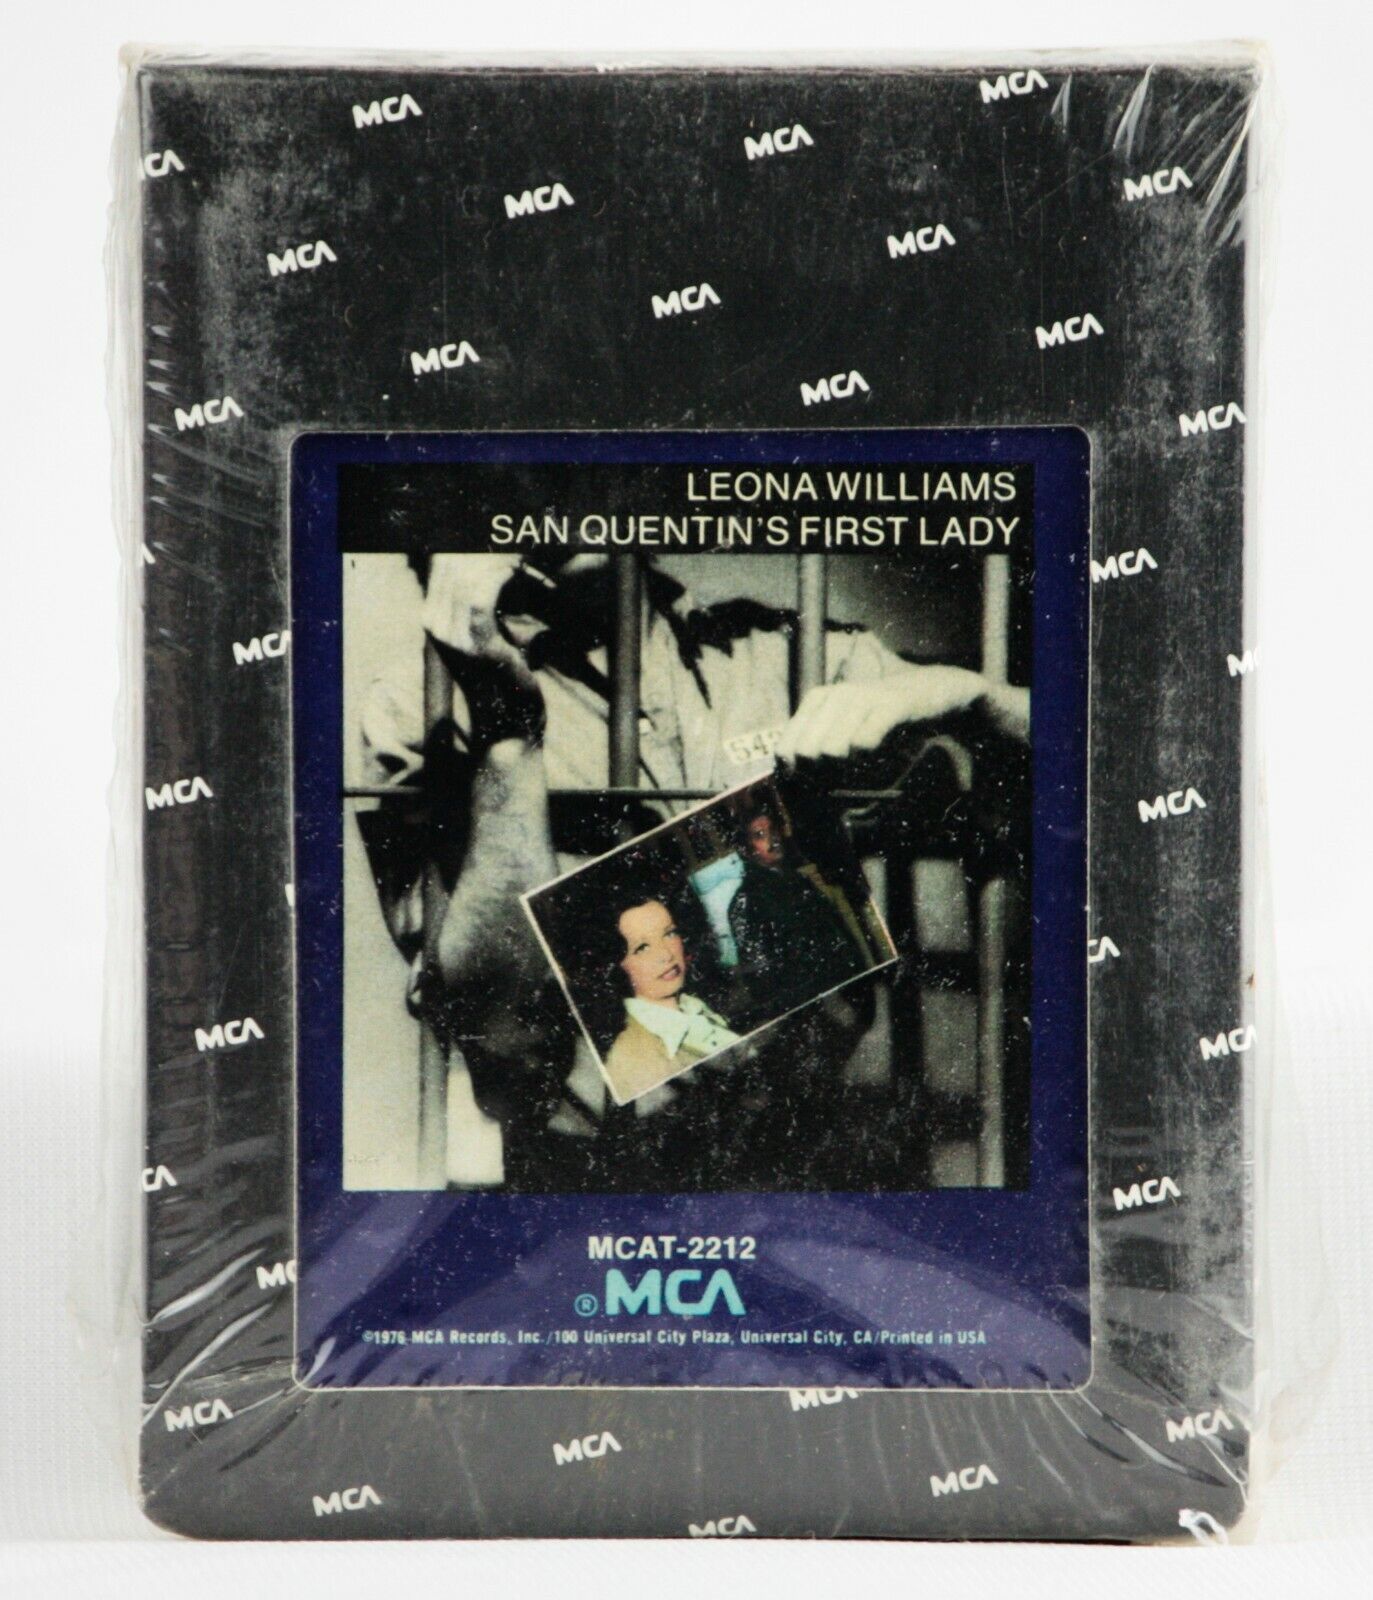 Vintage NOS 8 Track Tape UNTESTED Leona Williams San Quentin First Lady MCA 1976